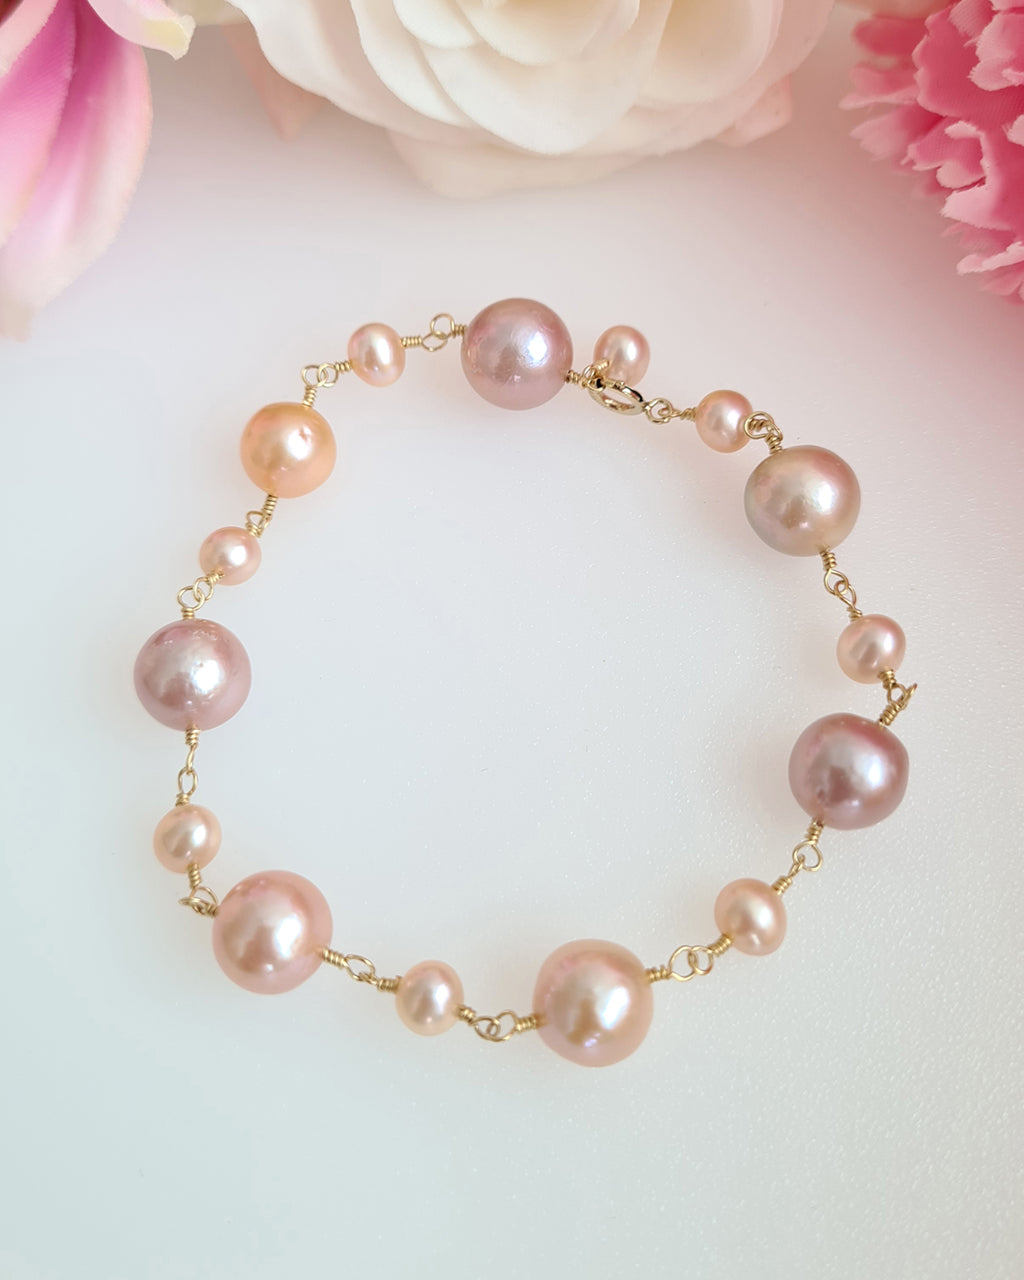 Pearl Pink Candy Beads, Pink Candy